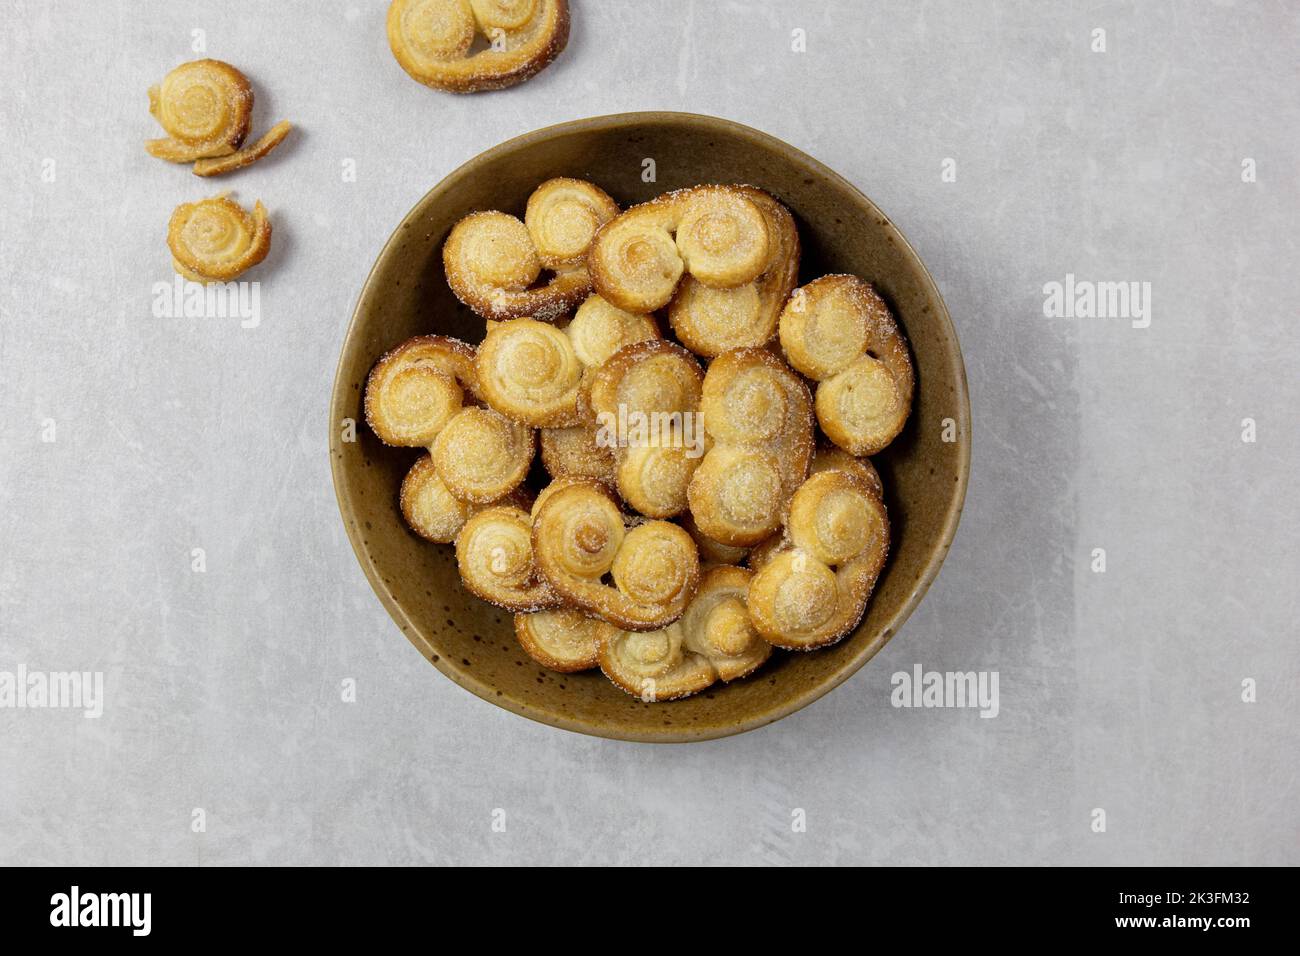 Puff pastry eyelet, Palmier cookies in a bowl with cinnamon and sugar on the light concrete background. Top view. Stock Photo